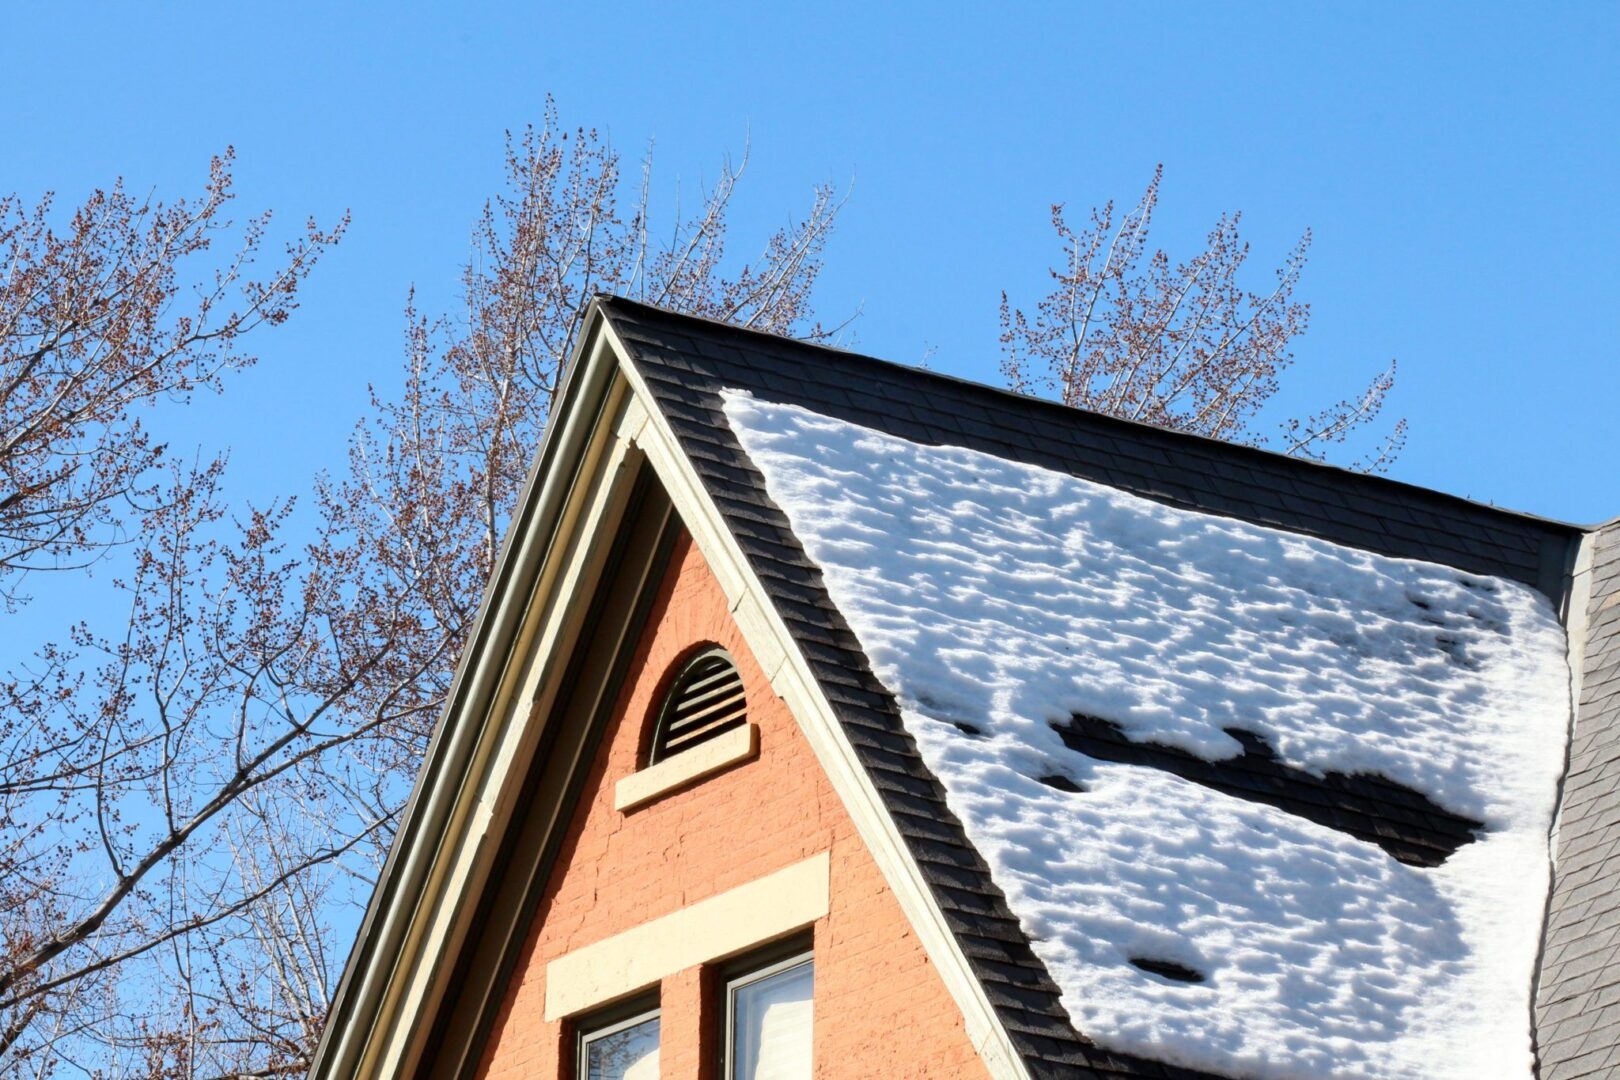 Winterization Tips for your Roof and Home!